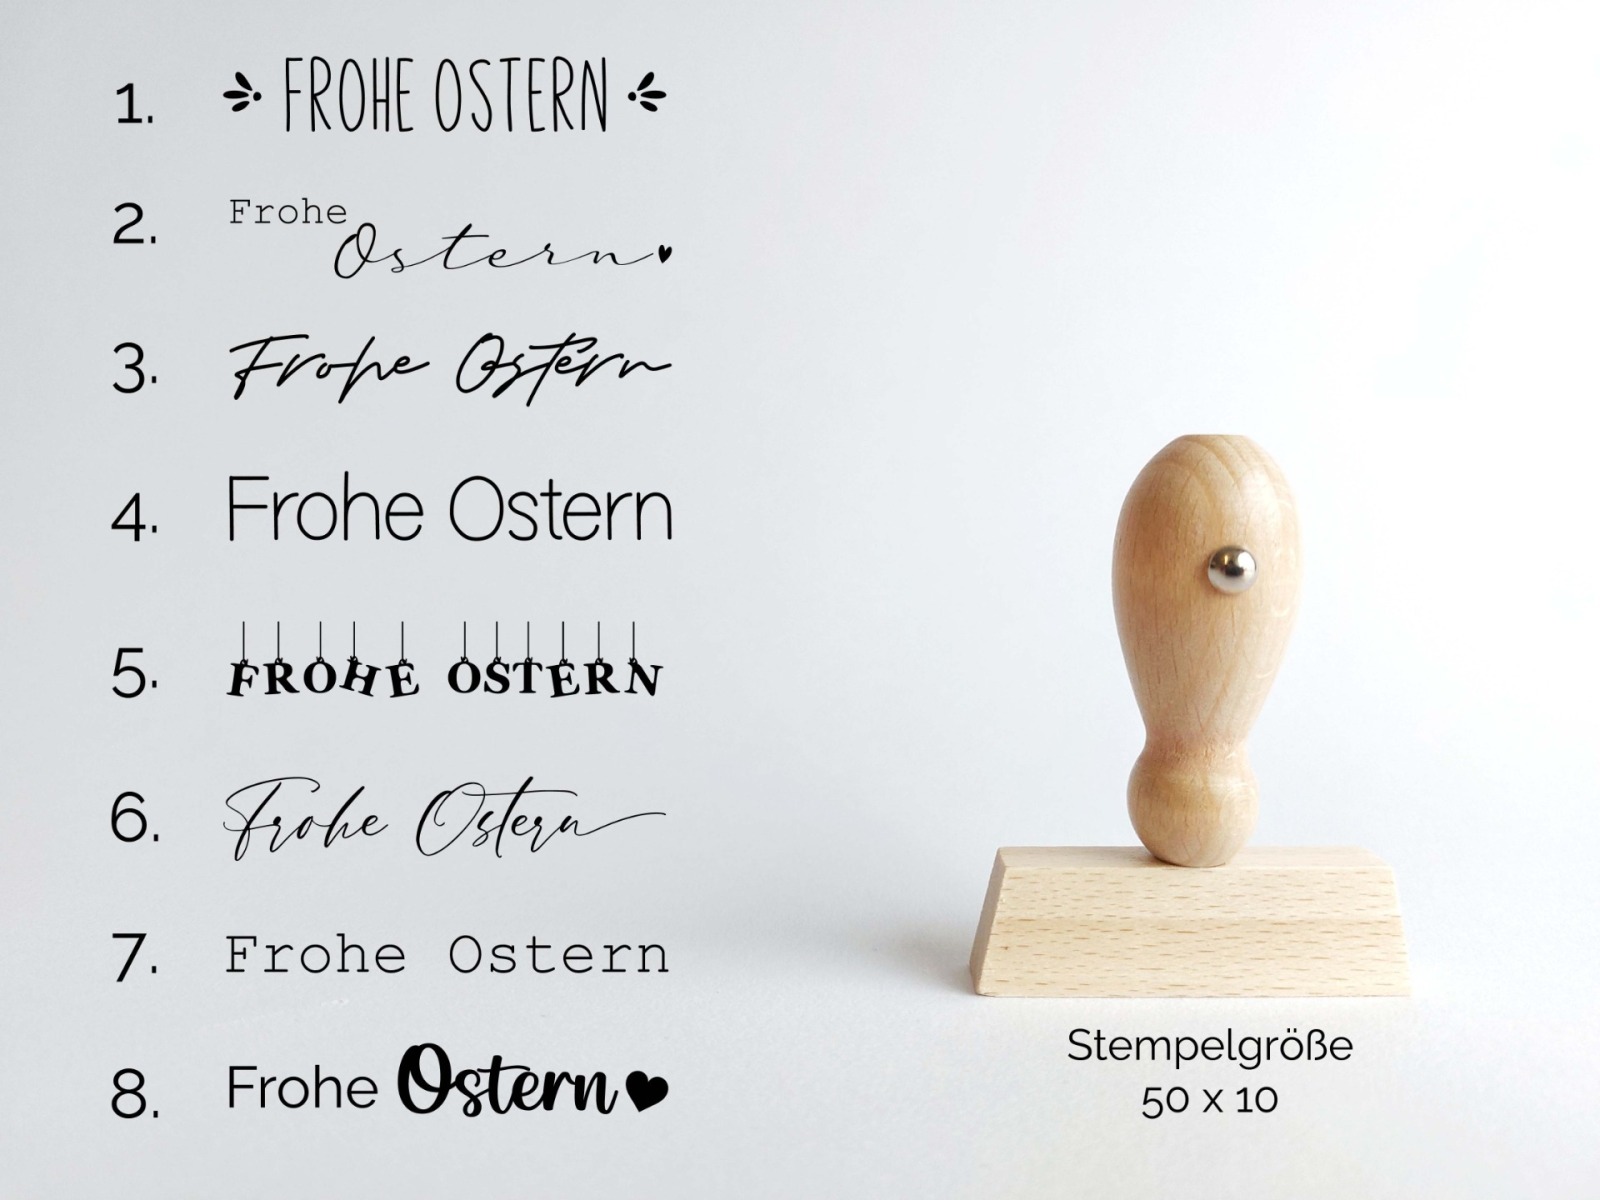 Frohe Ostern - Stempel - 50 x 10 mm